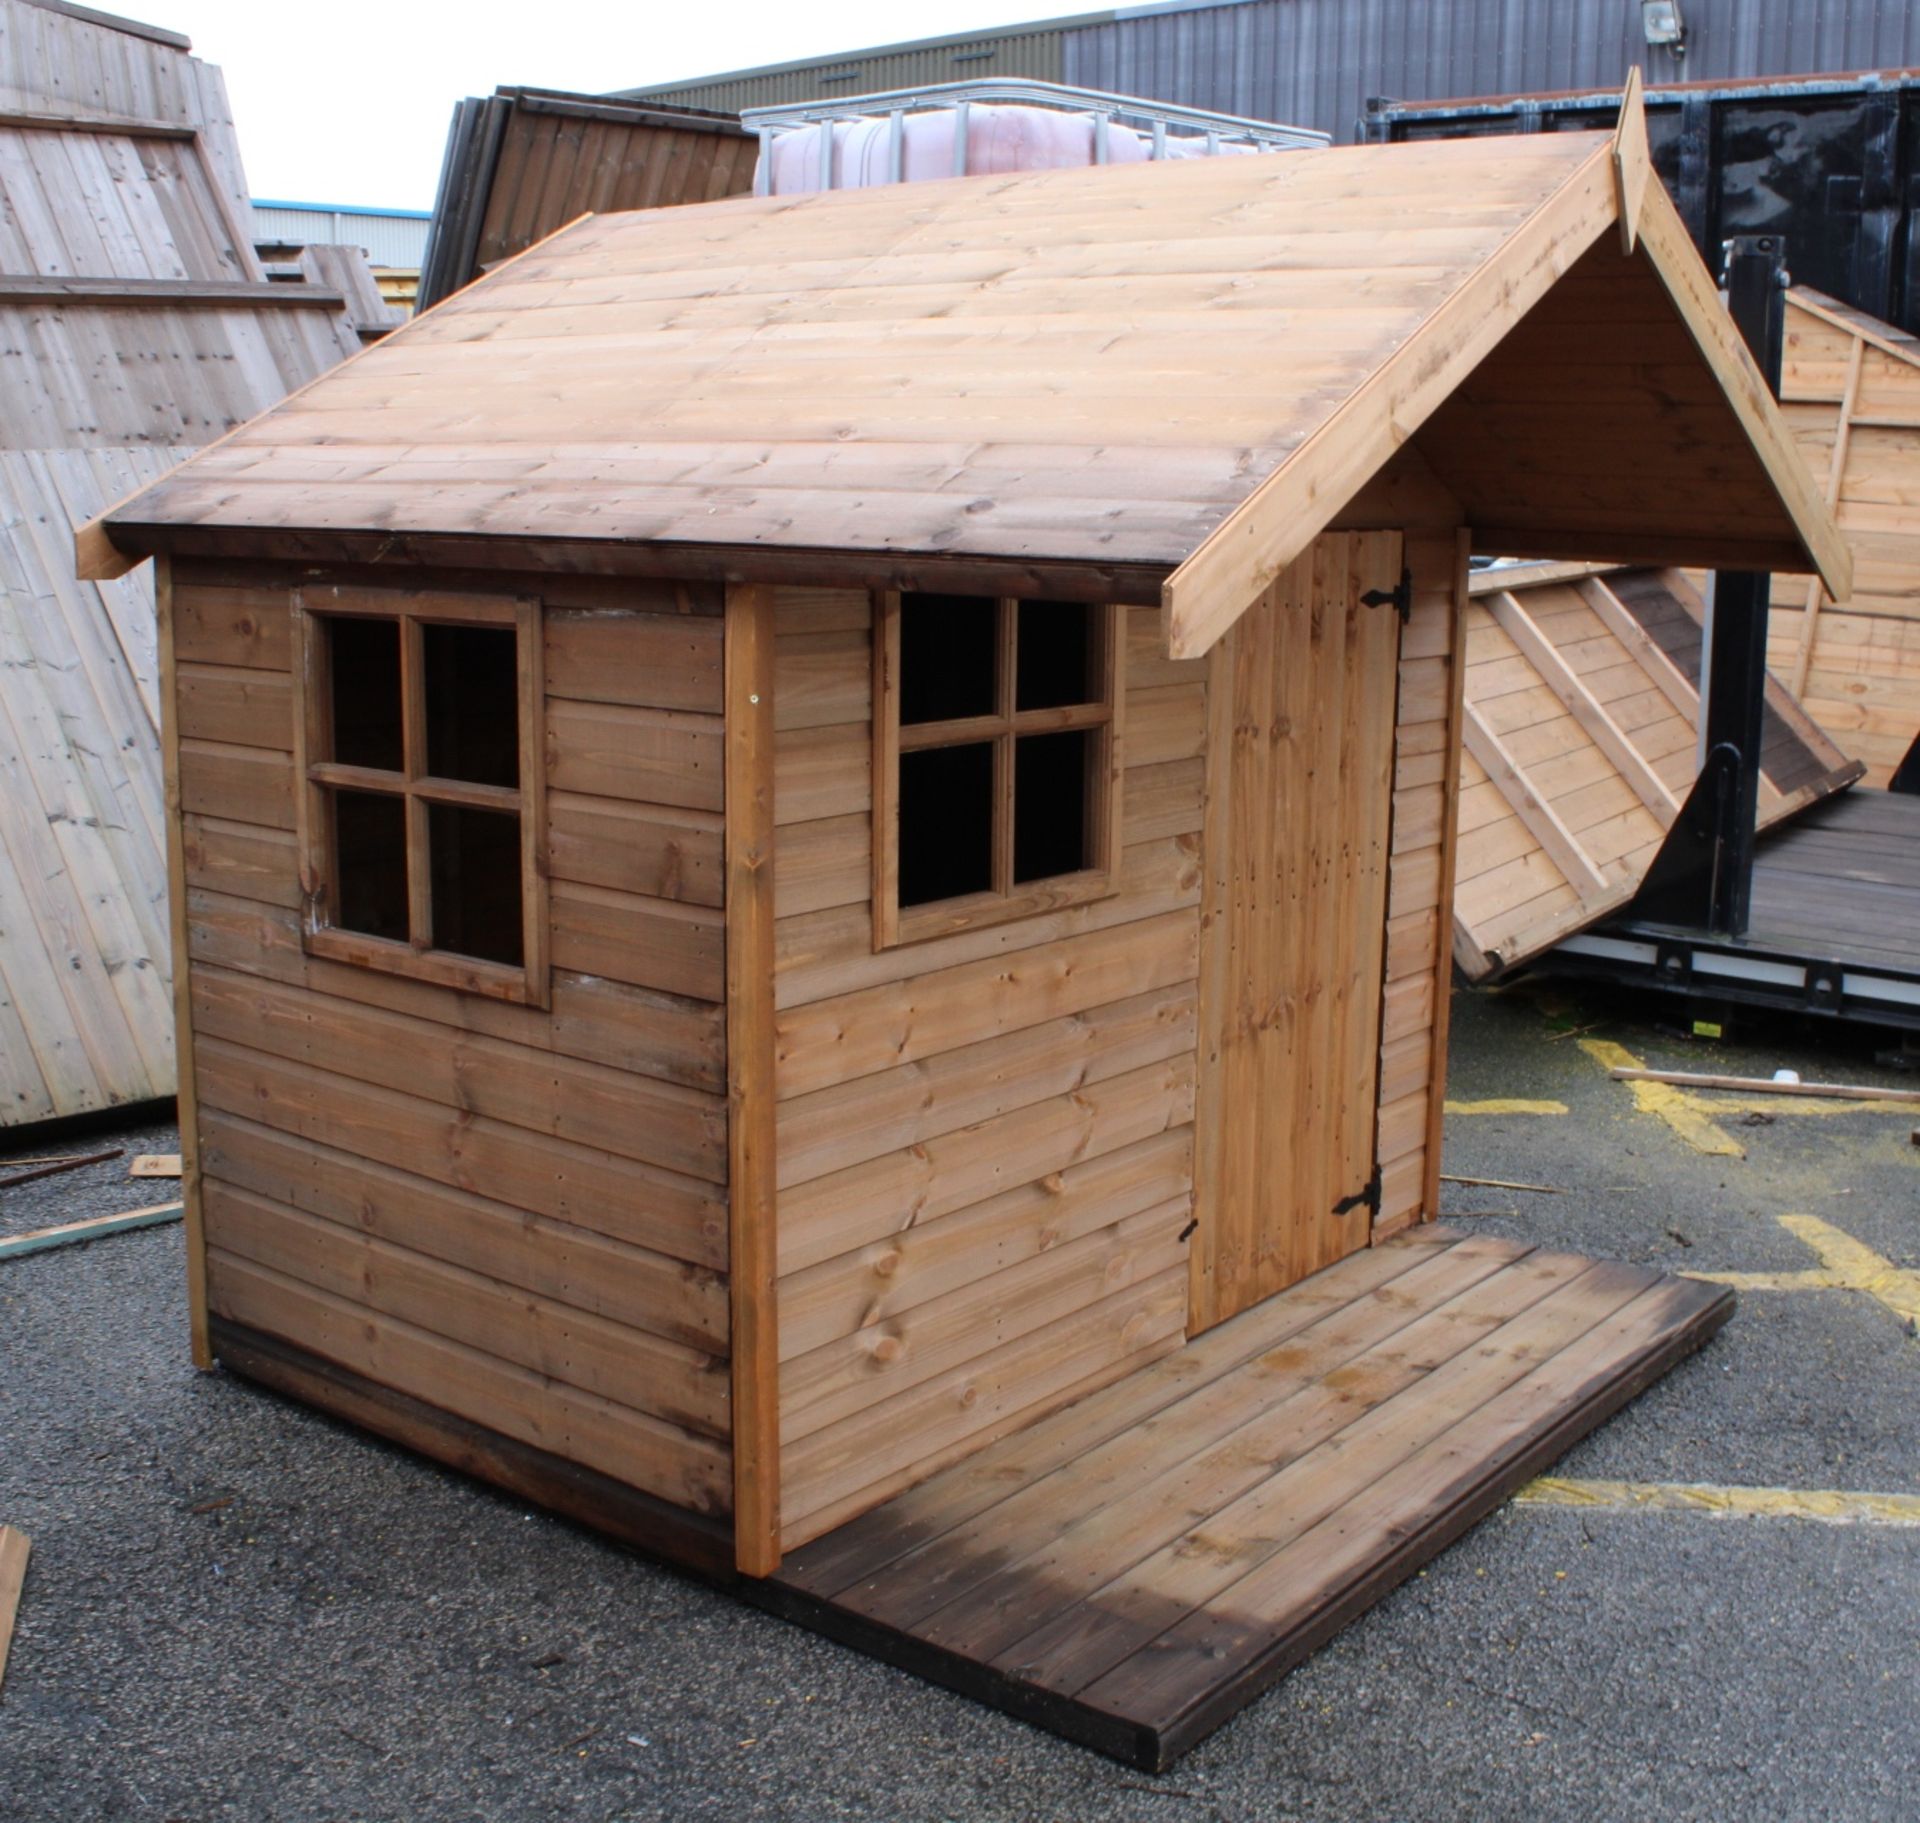 4x6 kids playhouse with overhang and veranda, Stnadrad 16mm Nominal Cladding - Image 4 of 4